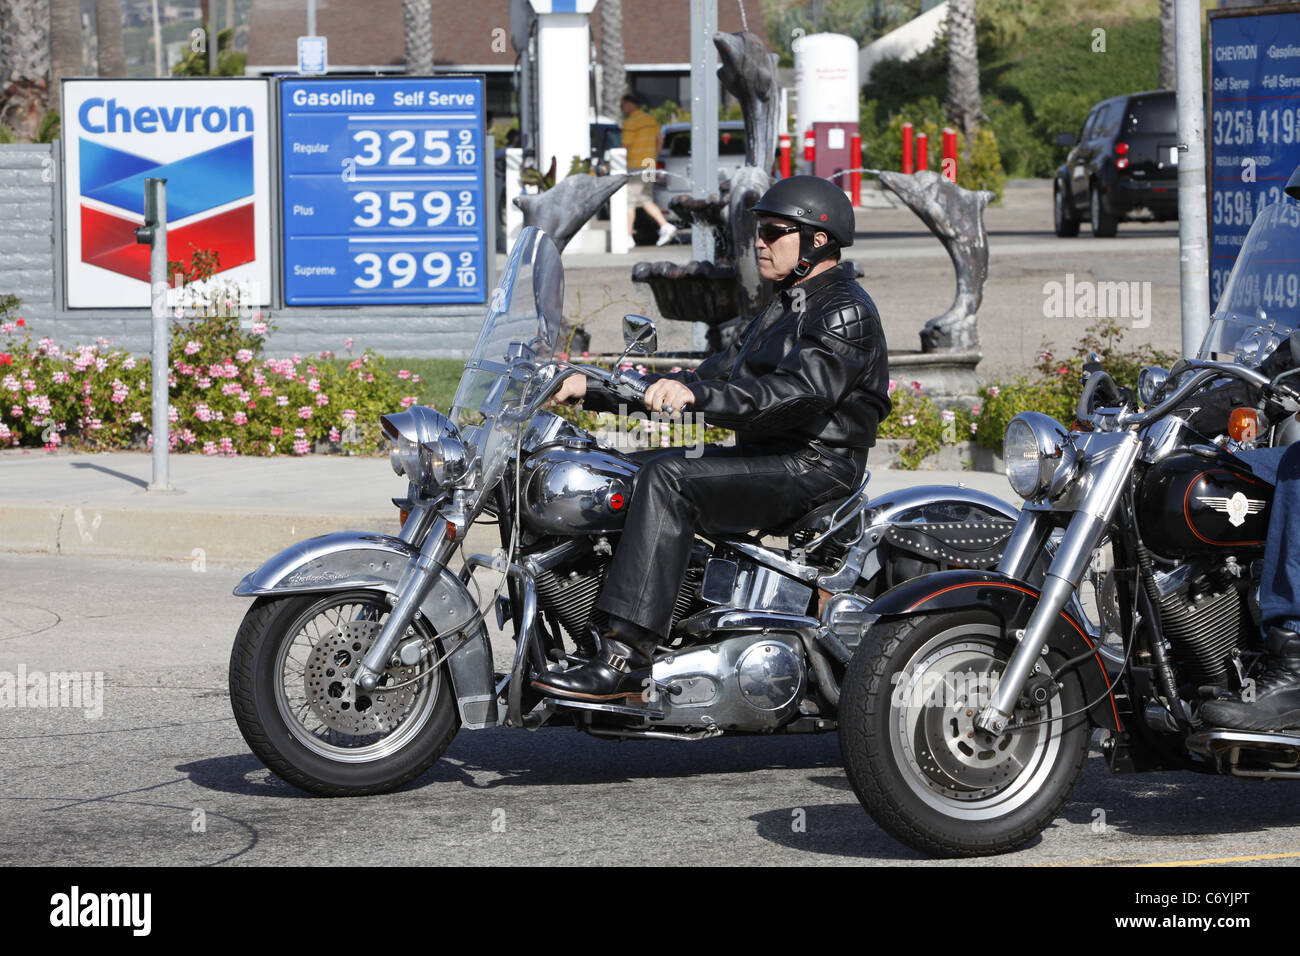 Arnold Schwarzenegger riding his cromed Harley Davidson to Malibu with  friends Los Angeles, USA - 20.03.10 Stock Photo - Alamy